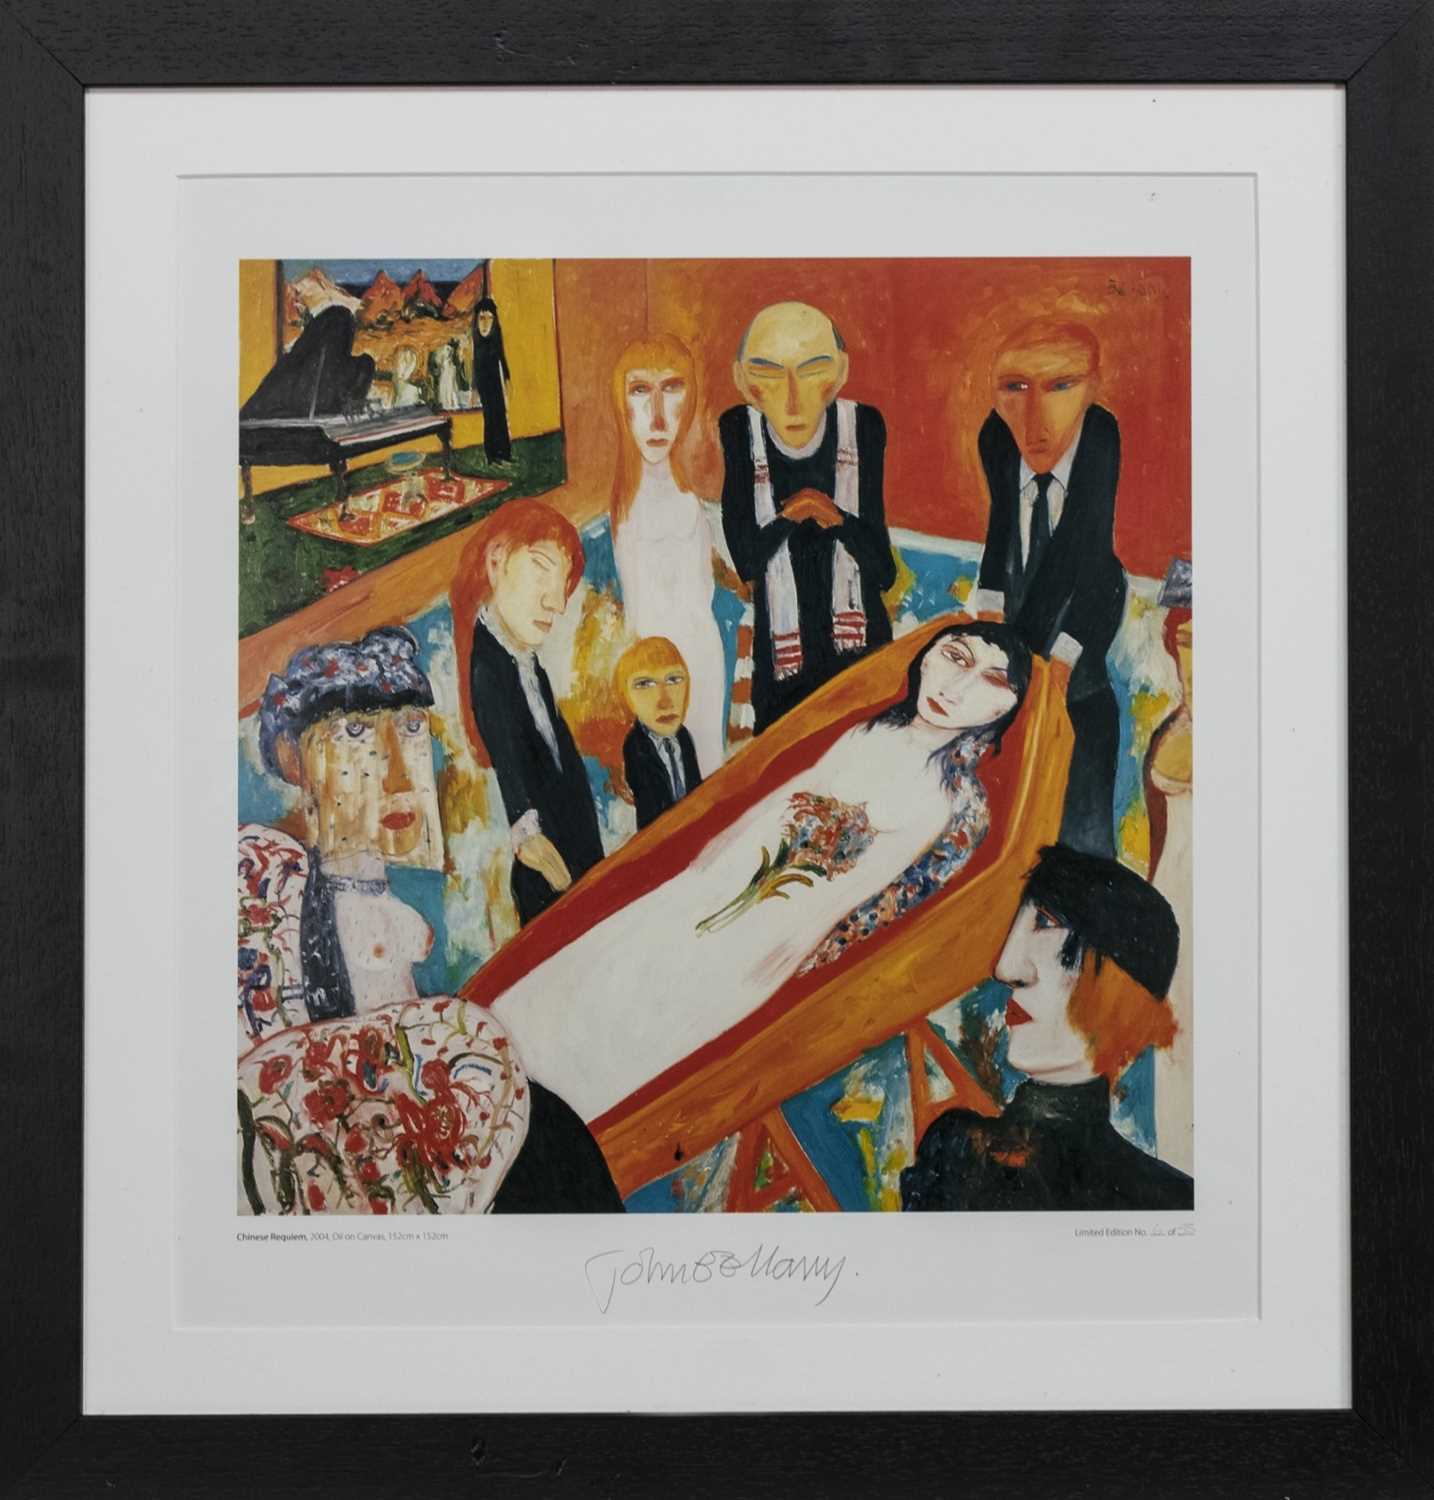 Lot 611 - CHINESE REQUIEM, A LITHOGRAPH BY JOHN BELLANY